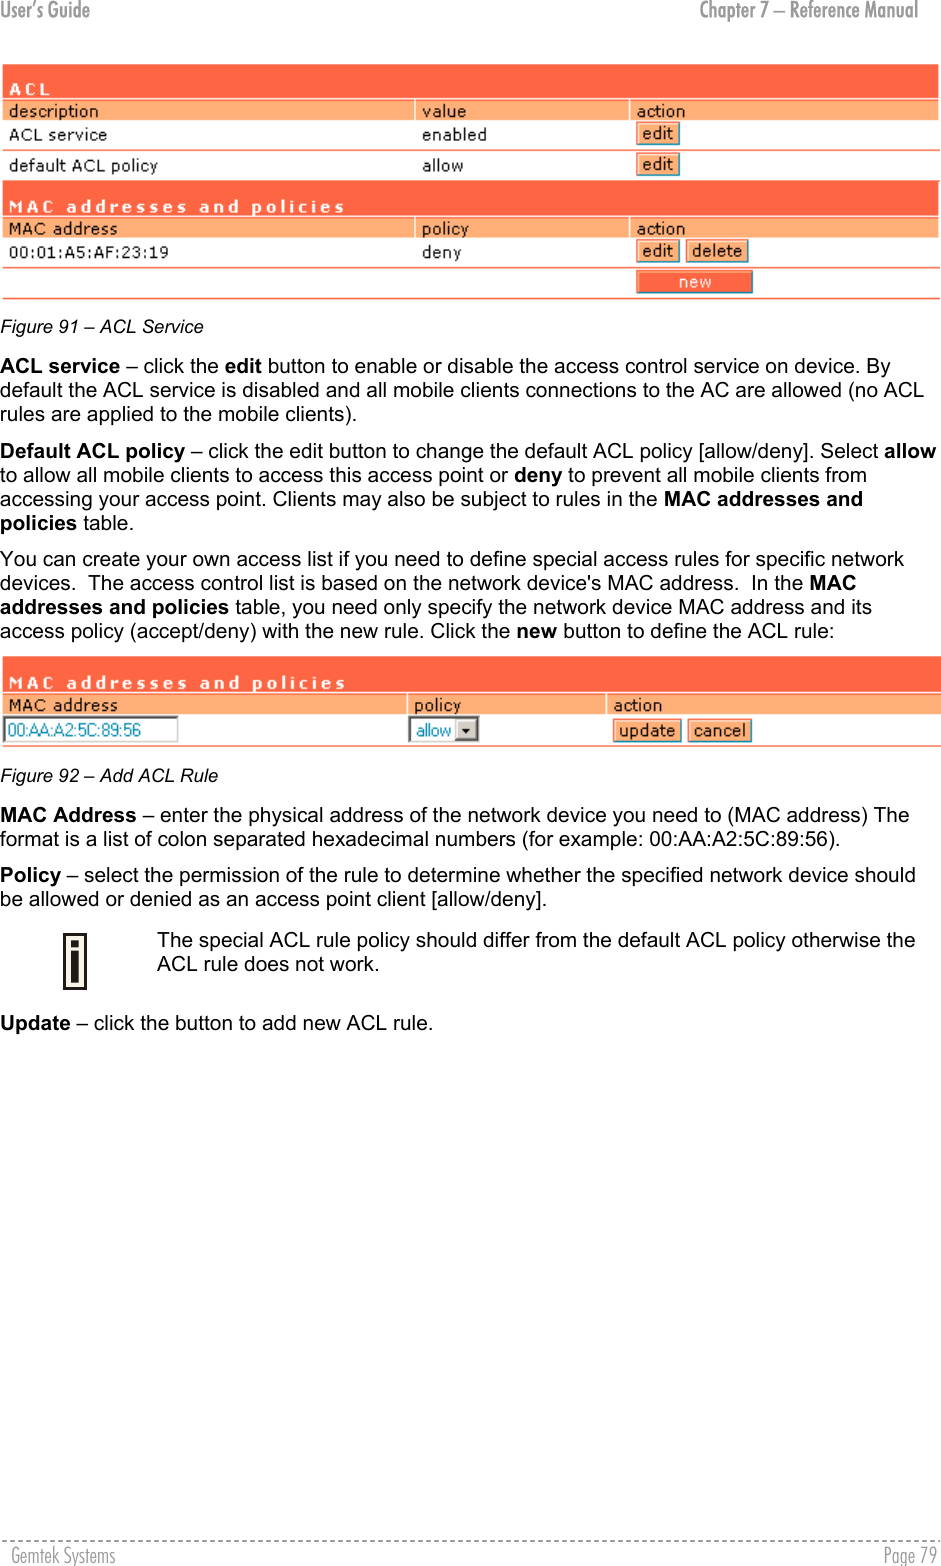 User’s Guide  Chapter 7 – Reference Manual  Figure 91 – ACL Service ACL service – click the edit button to enable or disable the access control service on device. By default the ACL service is disabled and all mobile clients connections to the AC are allowed (no ACL rules are applied to the mobile clients). Default ACL policy – click the edit button to change the default ACL policy [allow/deny]. Select allow to allow all mobile clients to access this access point or deny to prevent all mobile clients from accessing your access point. Clients may also be subject to rules in the MAC addresses and policies table. You can create your own access list if you need to define special access rules for specific network devices.  The access control list is based on the network device&apos;s MAC address.  In the MAC addresses and policies table, you need only specify the network device MAC address and its access policy (accept/deny) with the new rule. Click the new button to define the ACL rule:  Figure 92 – Add ACL Rule MAC Address – enter the physical address of the network device you need to (MAC address) The format is a list of colon separated hexadecimal numbers (for example: 00:AA:A2:5C:89:56). Policy – select the permission of the rule to determine whether the specified network device should be allowed or denied as an access point client [allow/deny].  The special ACL rule policy should differ from the default ACL policy otherwise the ACL rule does not work. Update – click the button to add new ACL rule. Gemtek Systems    Page 79  